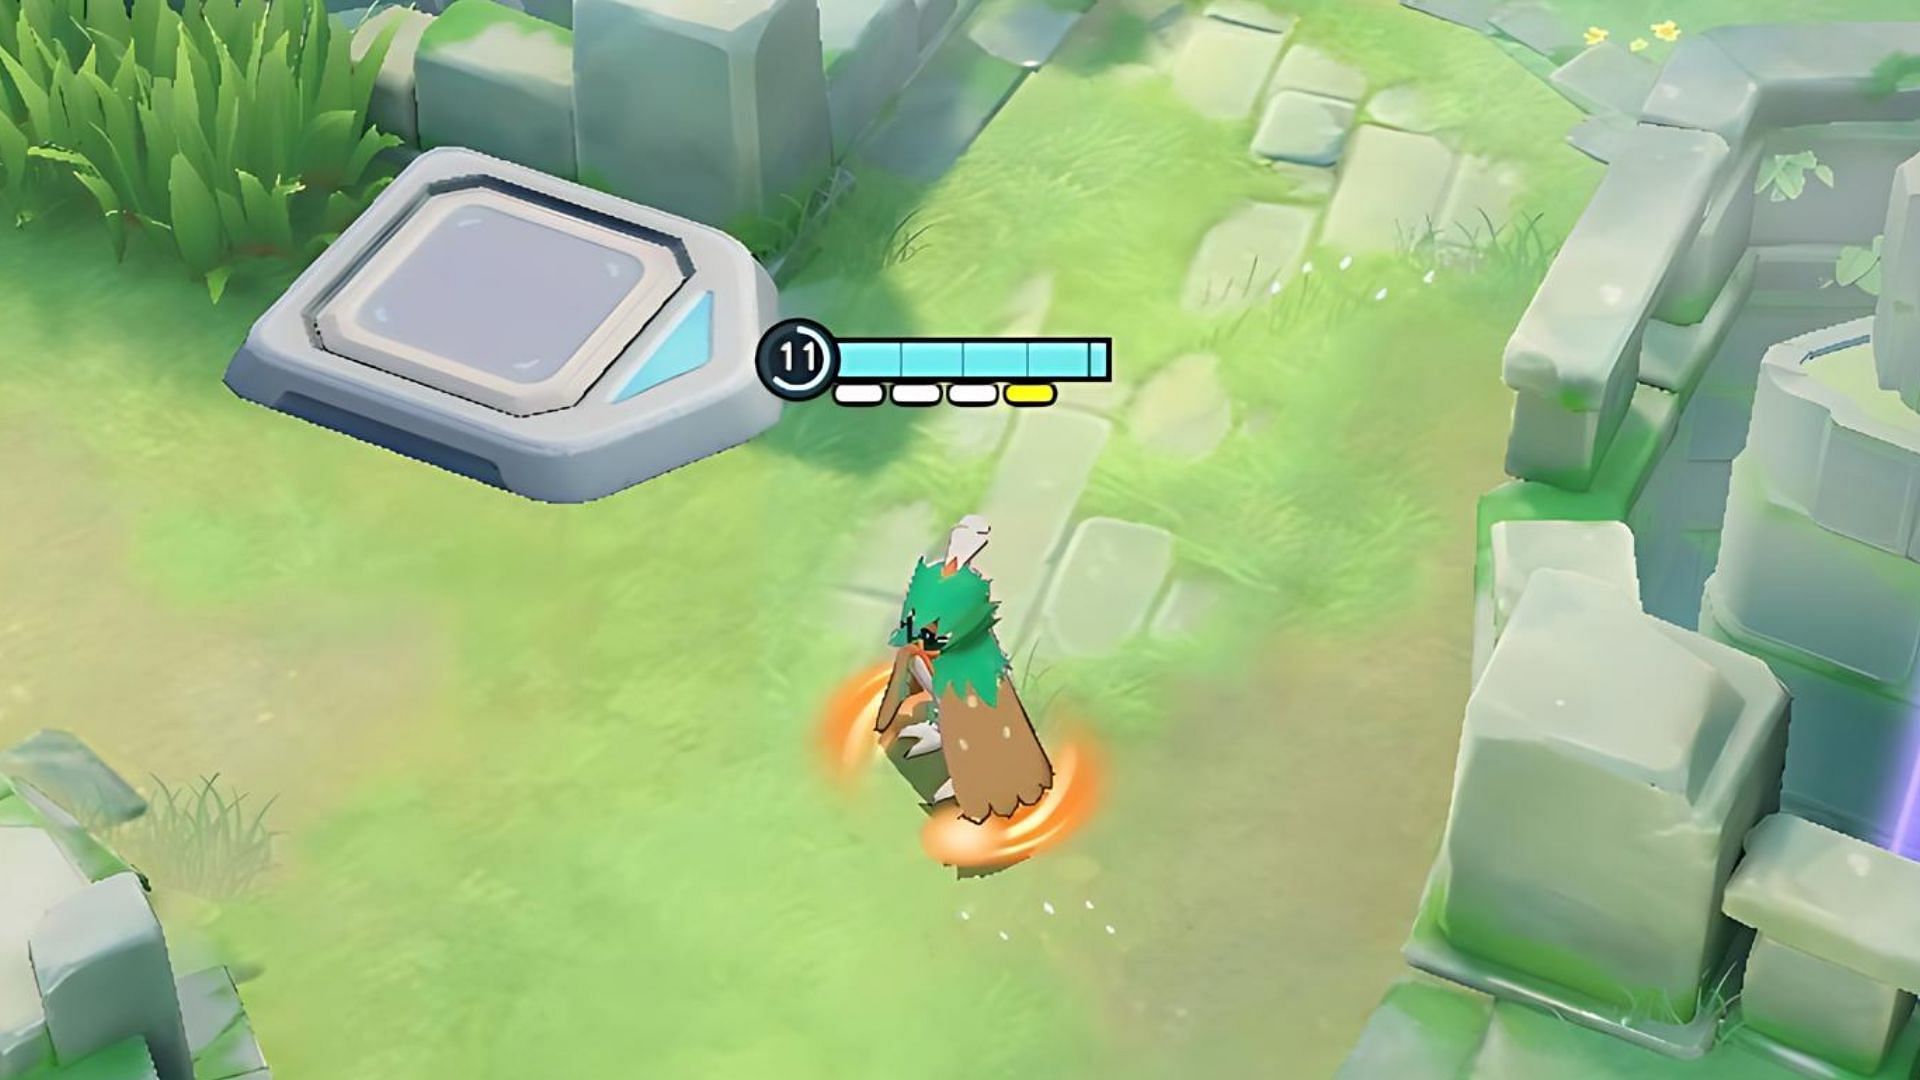 Boosted Attack Gauge can be found under the health bar in the game (Image via The Pokemon Company)